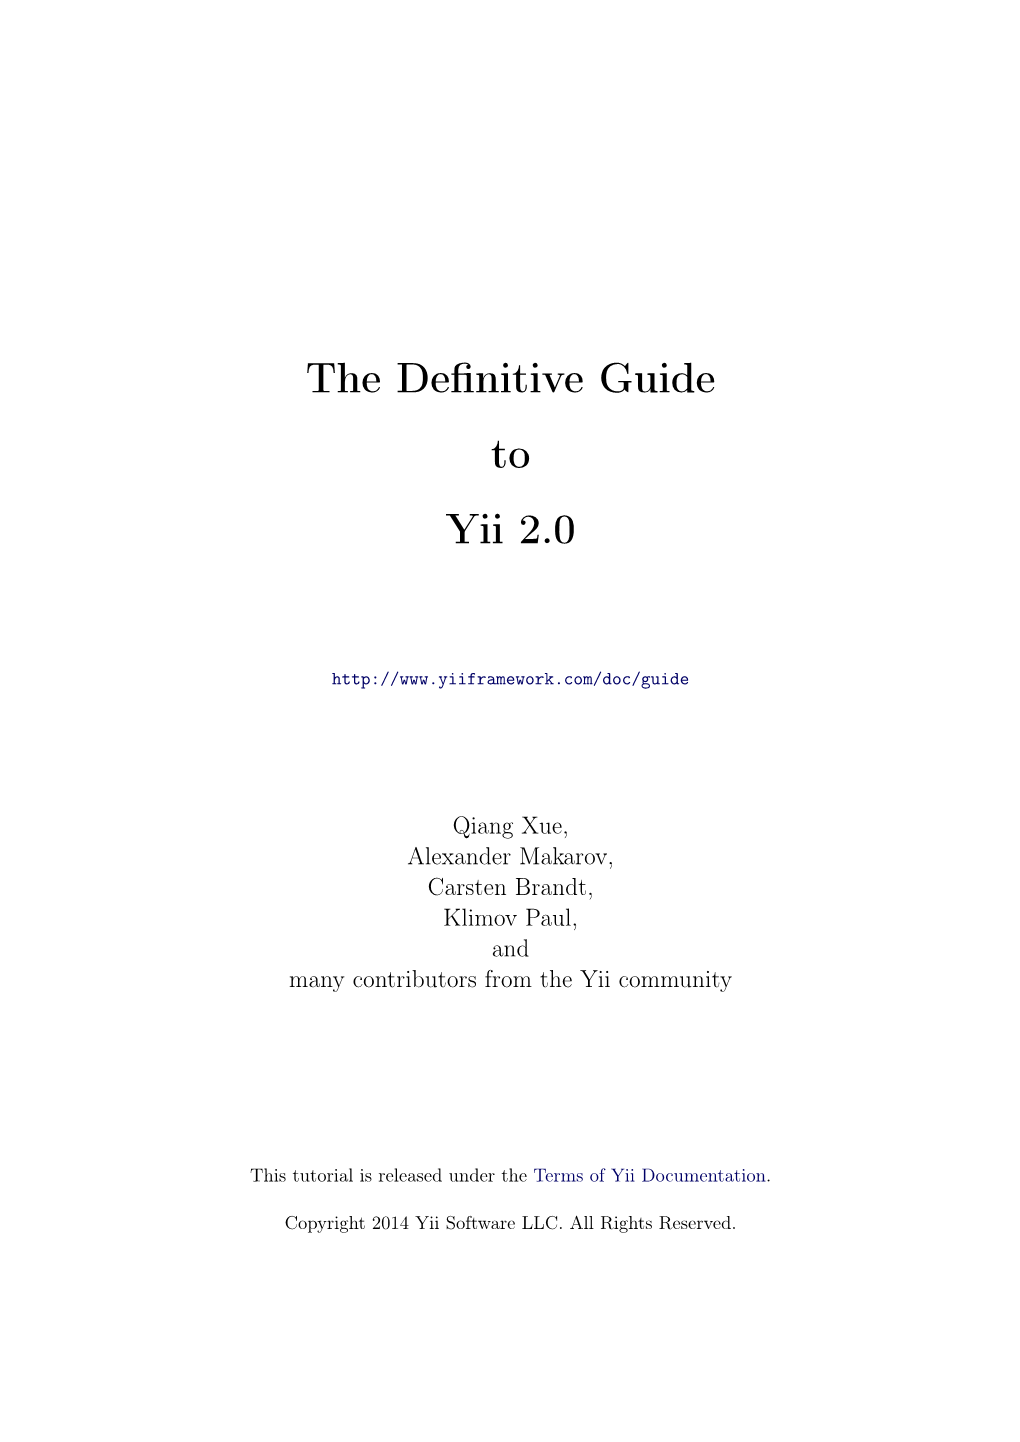 "The Definitive Guide to Yii 2.0"